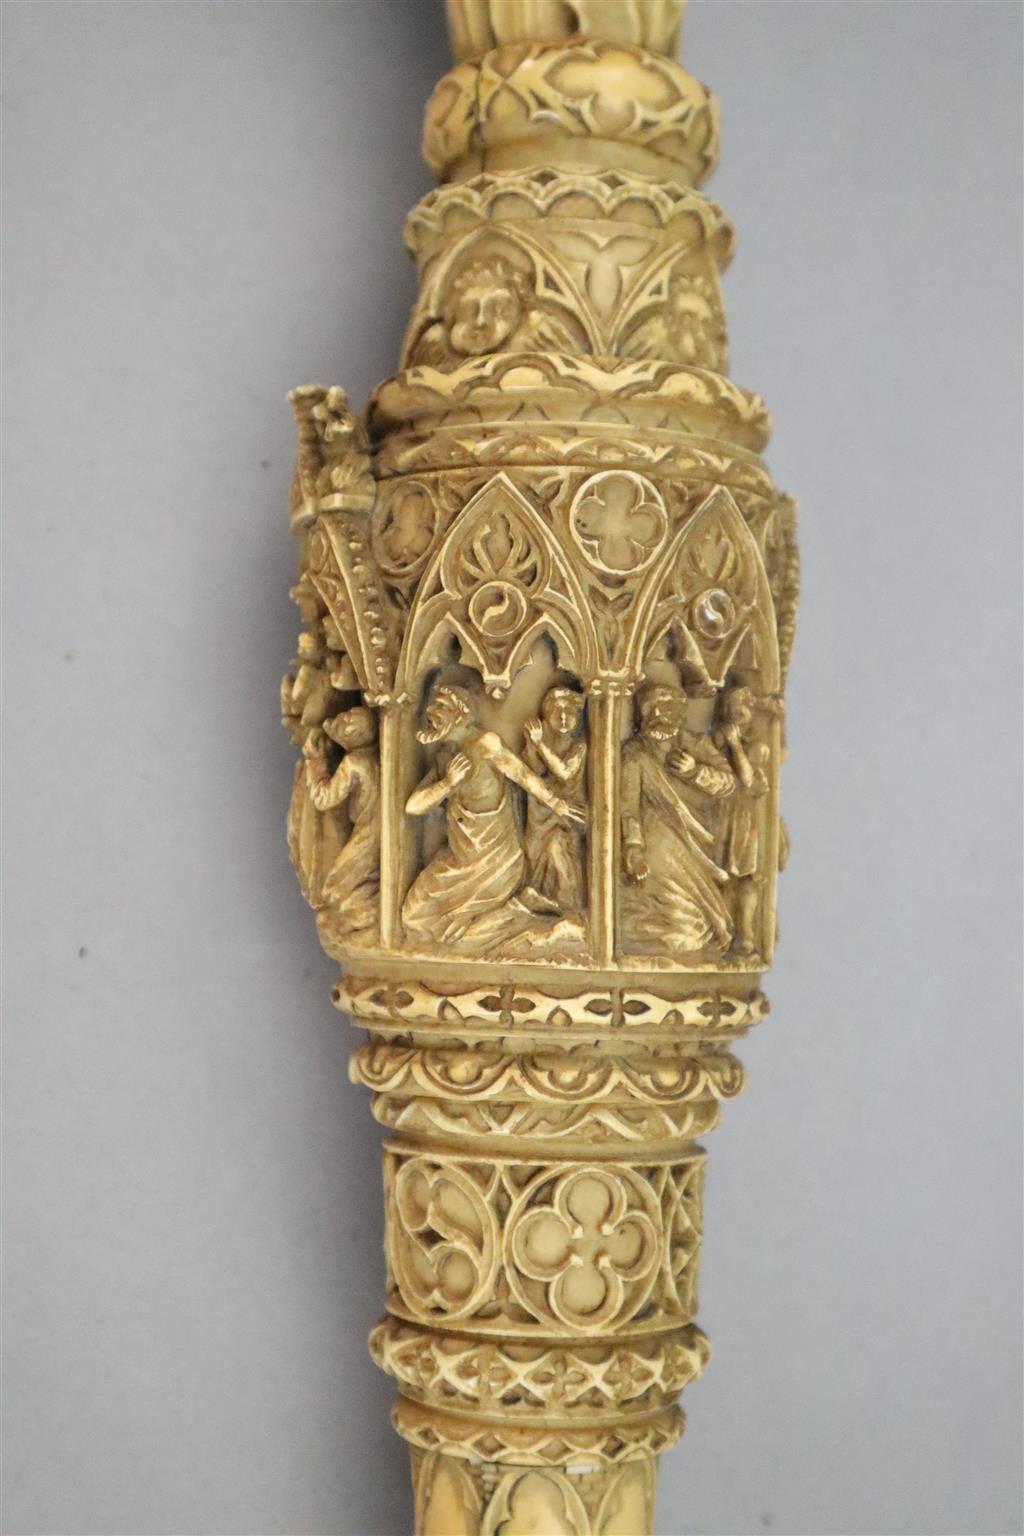 A 19th century Dieppe carved ivory crozier, thought to be a copy of a 13th century example, length 46in.